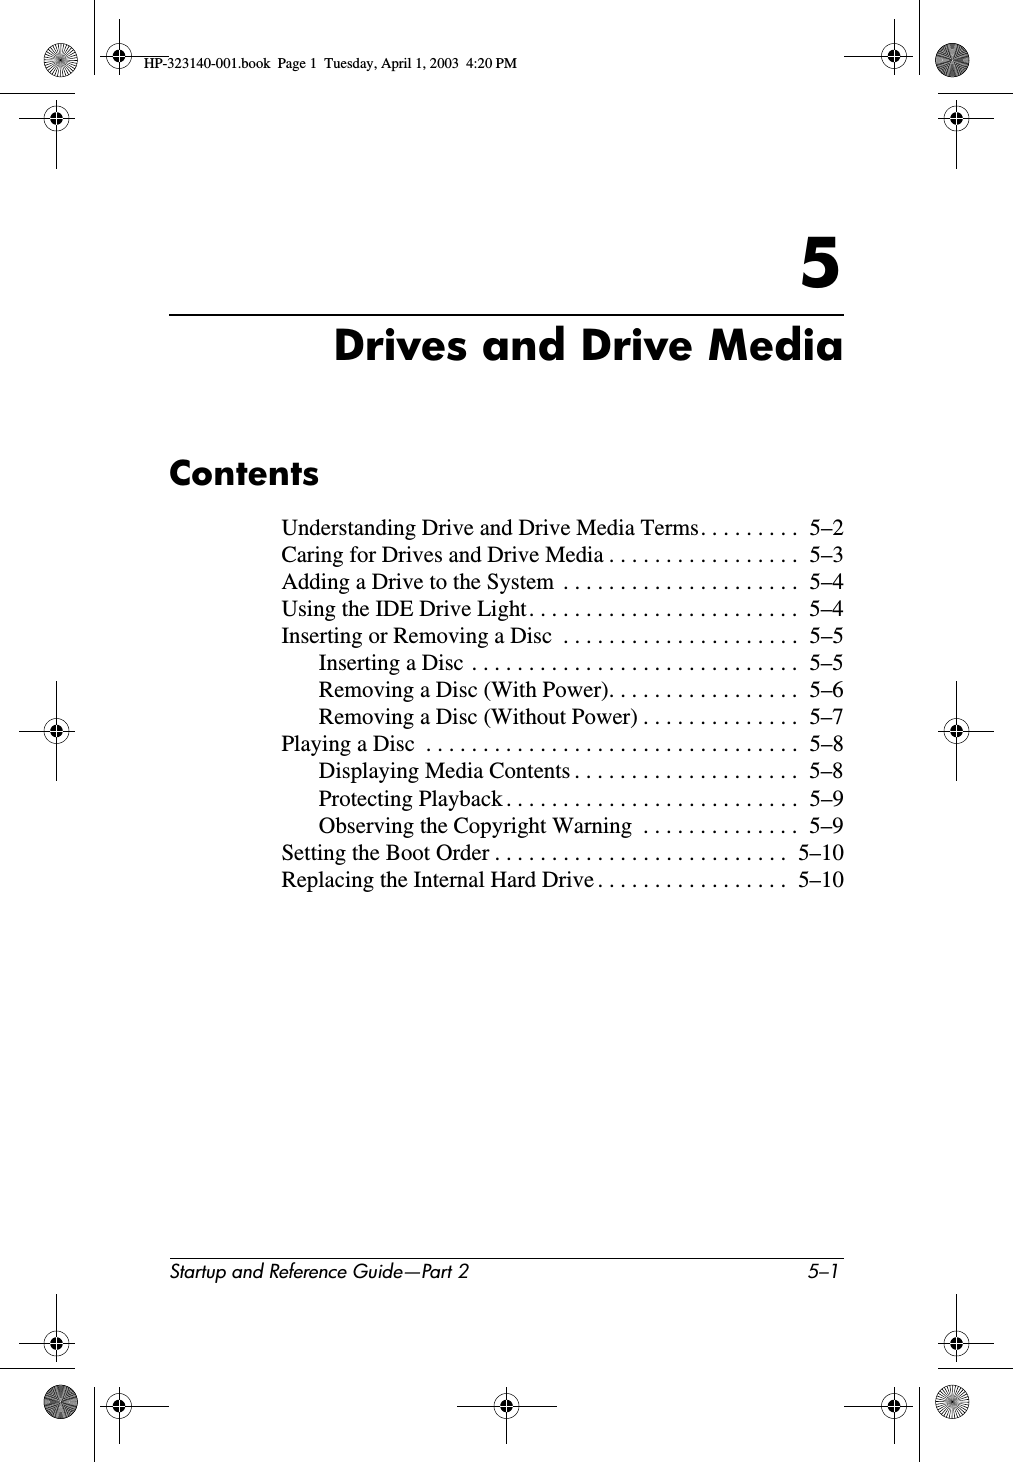 Startup and Reference Guide—Part 2 5–15Drives and Drive MediaContentsUnderstanding Drive and Drive Media Terms. . . . . . . . .  5–2Caring for Drives and Drive Media . . . . . . . . . . . . . . . . .  5–3Adding a Drive to the System  . . . . . . . . . . . . . . . . . . . . .  5–4Using the IDE Drive Light. . . . . . . . . . . . . . . . . . . . . . . .  5–4Inserting or Removing a Disc  . . . . . . . . . . . . . . . . . . . . .  5–5Inserting a Disc . . . . . . . . . . . . . . . . . . . . . . . . . . . . .  5–5Removing a Disc (With Power). . . . . . . . . . . . . . . . .  5–6Removing a Disc (Without Power) . . . . . . . . . . . . . .  5–7Playing a Disc  . . . . . . . . . . . . . . . . . . . . . . . . . . . . . . . . .  5–8Displaying Media Contents . . . . . . . . . . . . . . . . . . . .  5–8Protecting Playback . . . . . . . . . . . . . . . . . . . . . . . . . .  5–9Observing the Copyright Warning  . . . . . . . . . . . . . .  5–9Setting the Boot Order . . . . . . . . . . . . . . . . . . . . . . . . . .  5–10Replacing the Internal Hard Drive . . . . . . . . . . . . . . . . .  5–10HP-323140-001.book  Page 1  Tuesday, April 1, 2003  4:20 PM